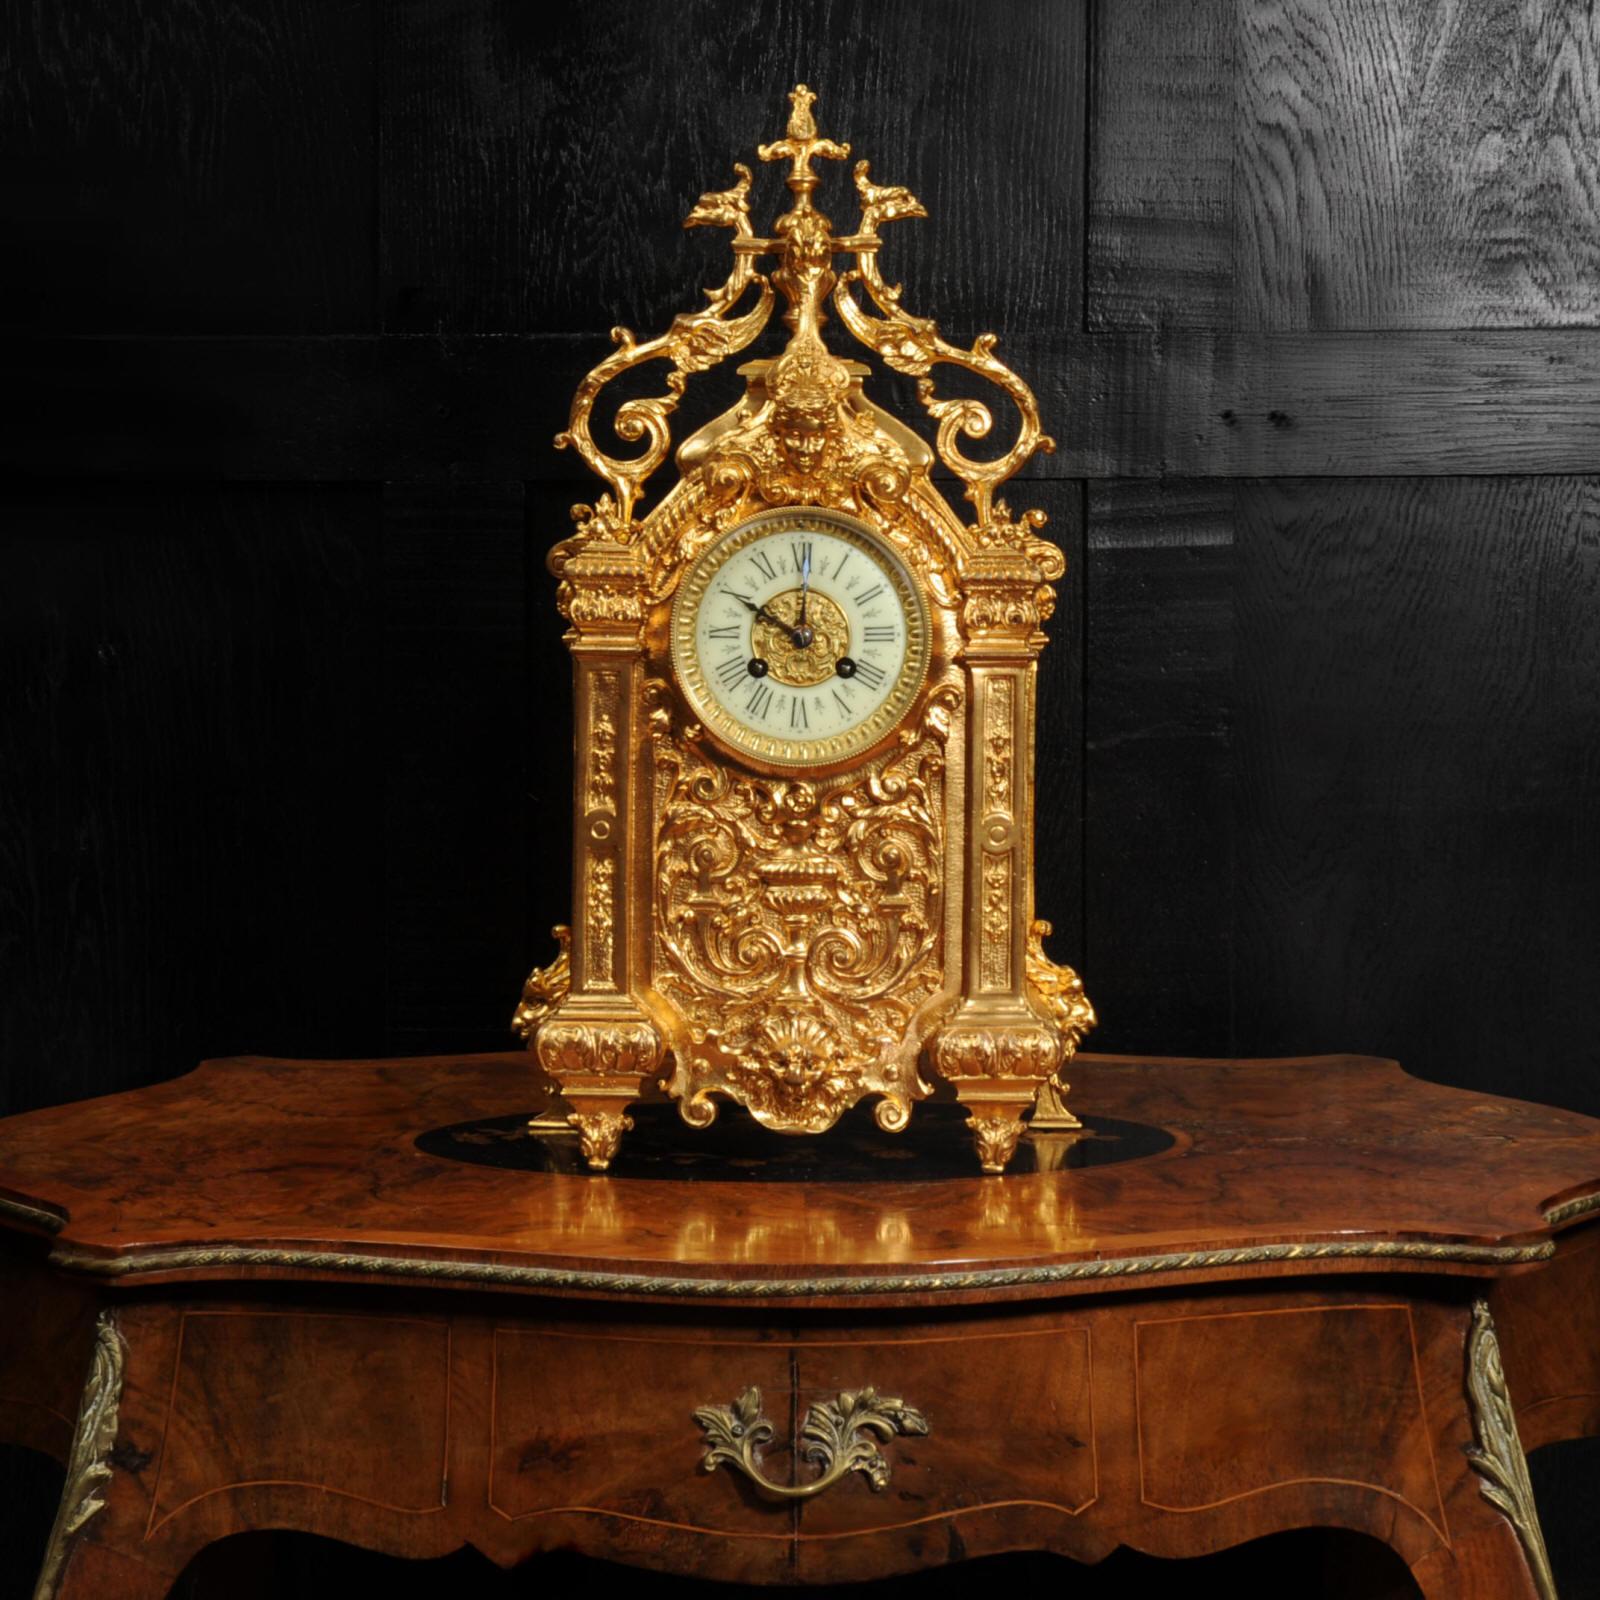 A beautiful antique French clock in finely gilded bronze. It is Baroque in style with a goddess mask, a lions mask and mythical creatures. The front is architecturally designed with two Corinthian columns with a panel of an urn sounded by scrolling